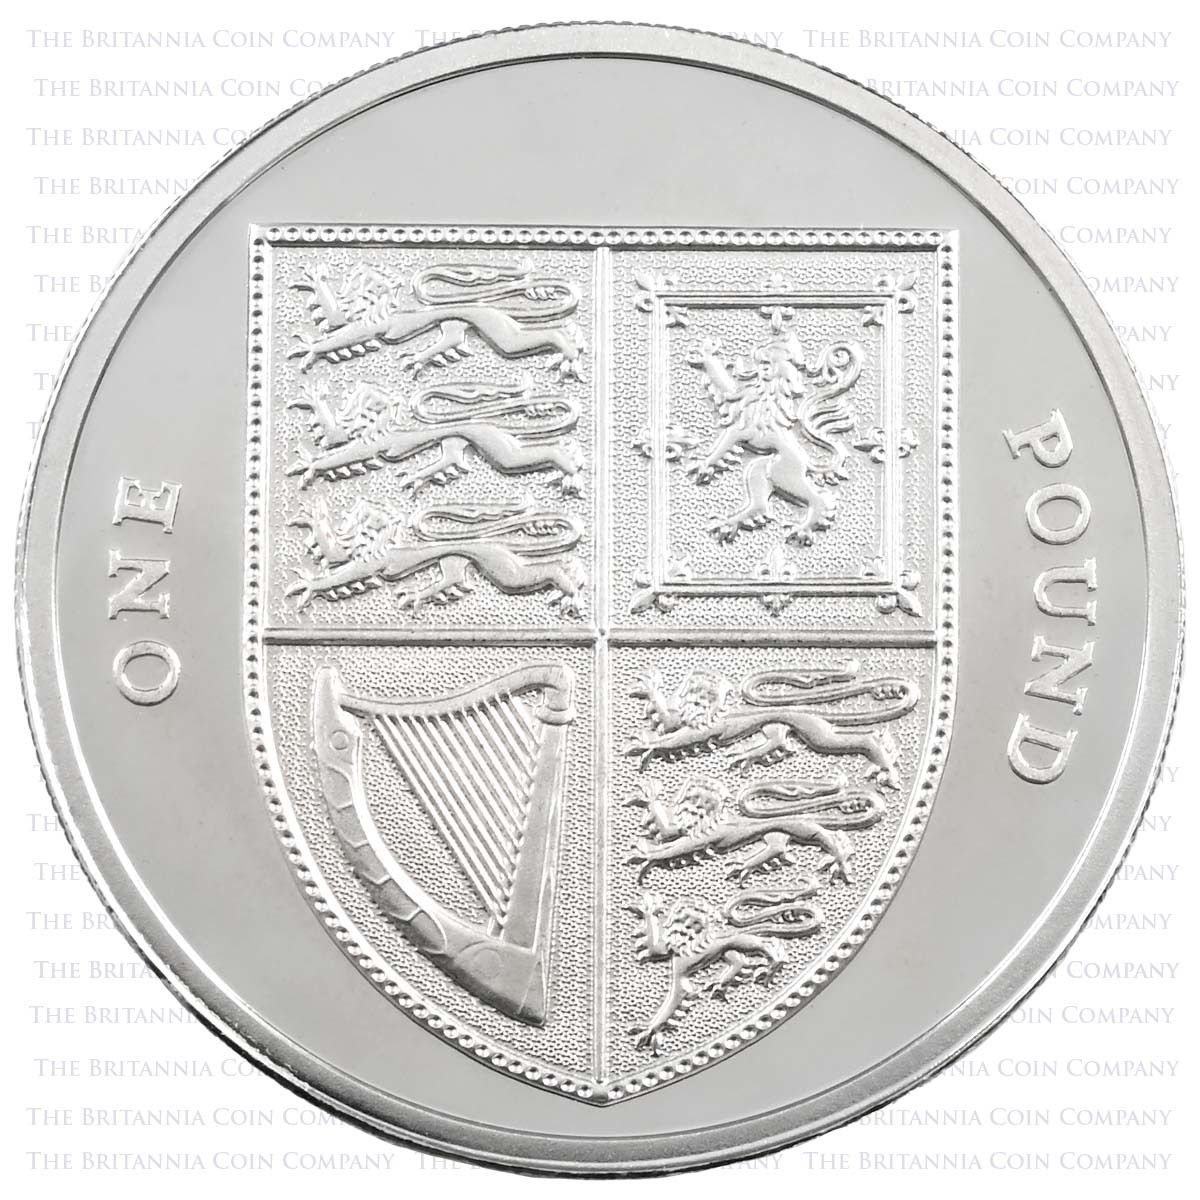 UK09SP 2009 Shield Of Royal Arms £1 Silver Proof Reverse